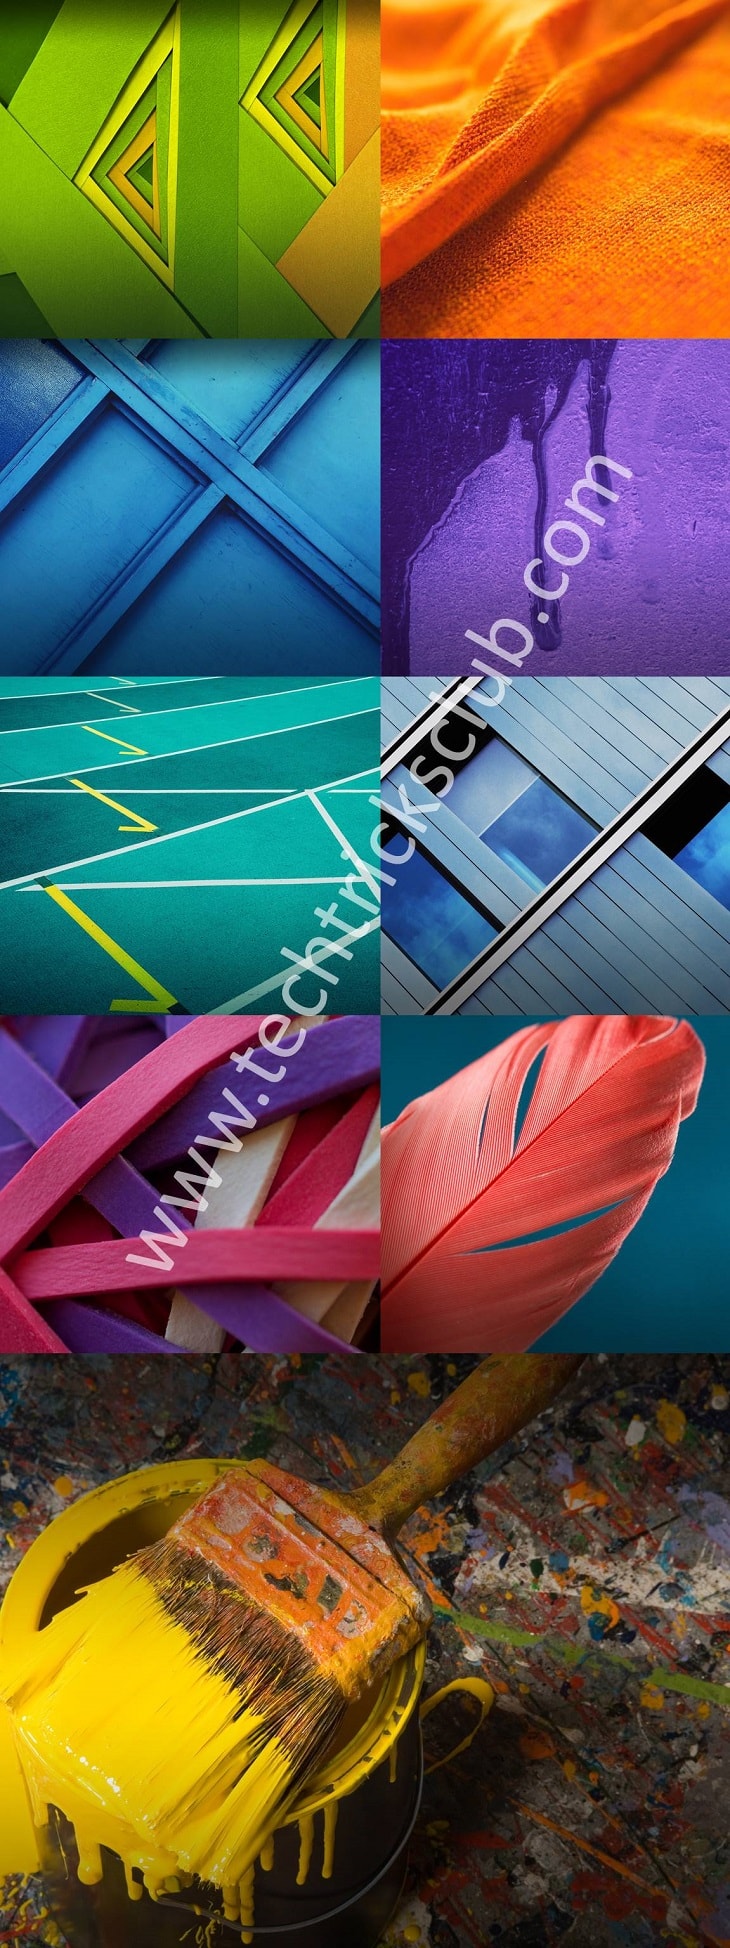 moto x play wallpapers hd,graphic design,colorfulness